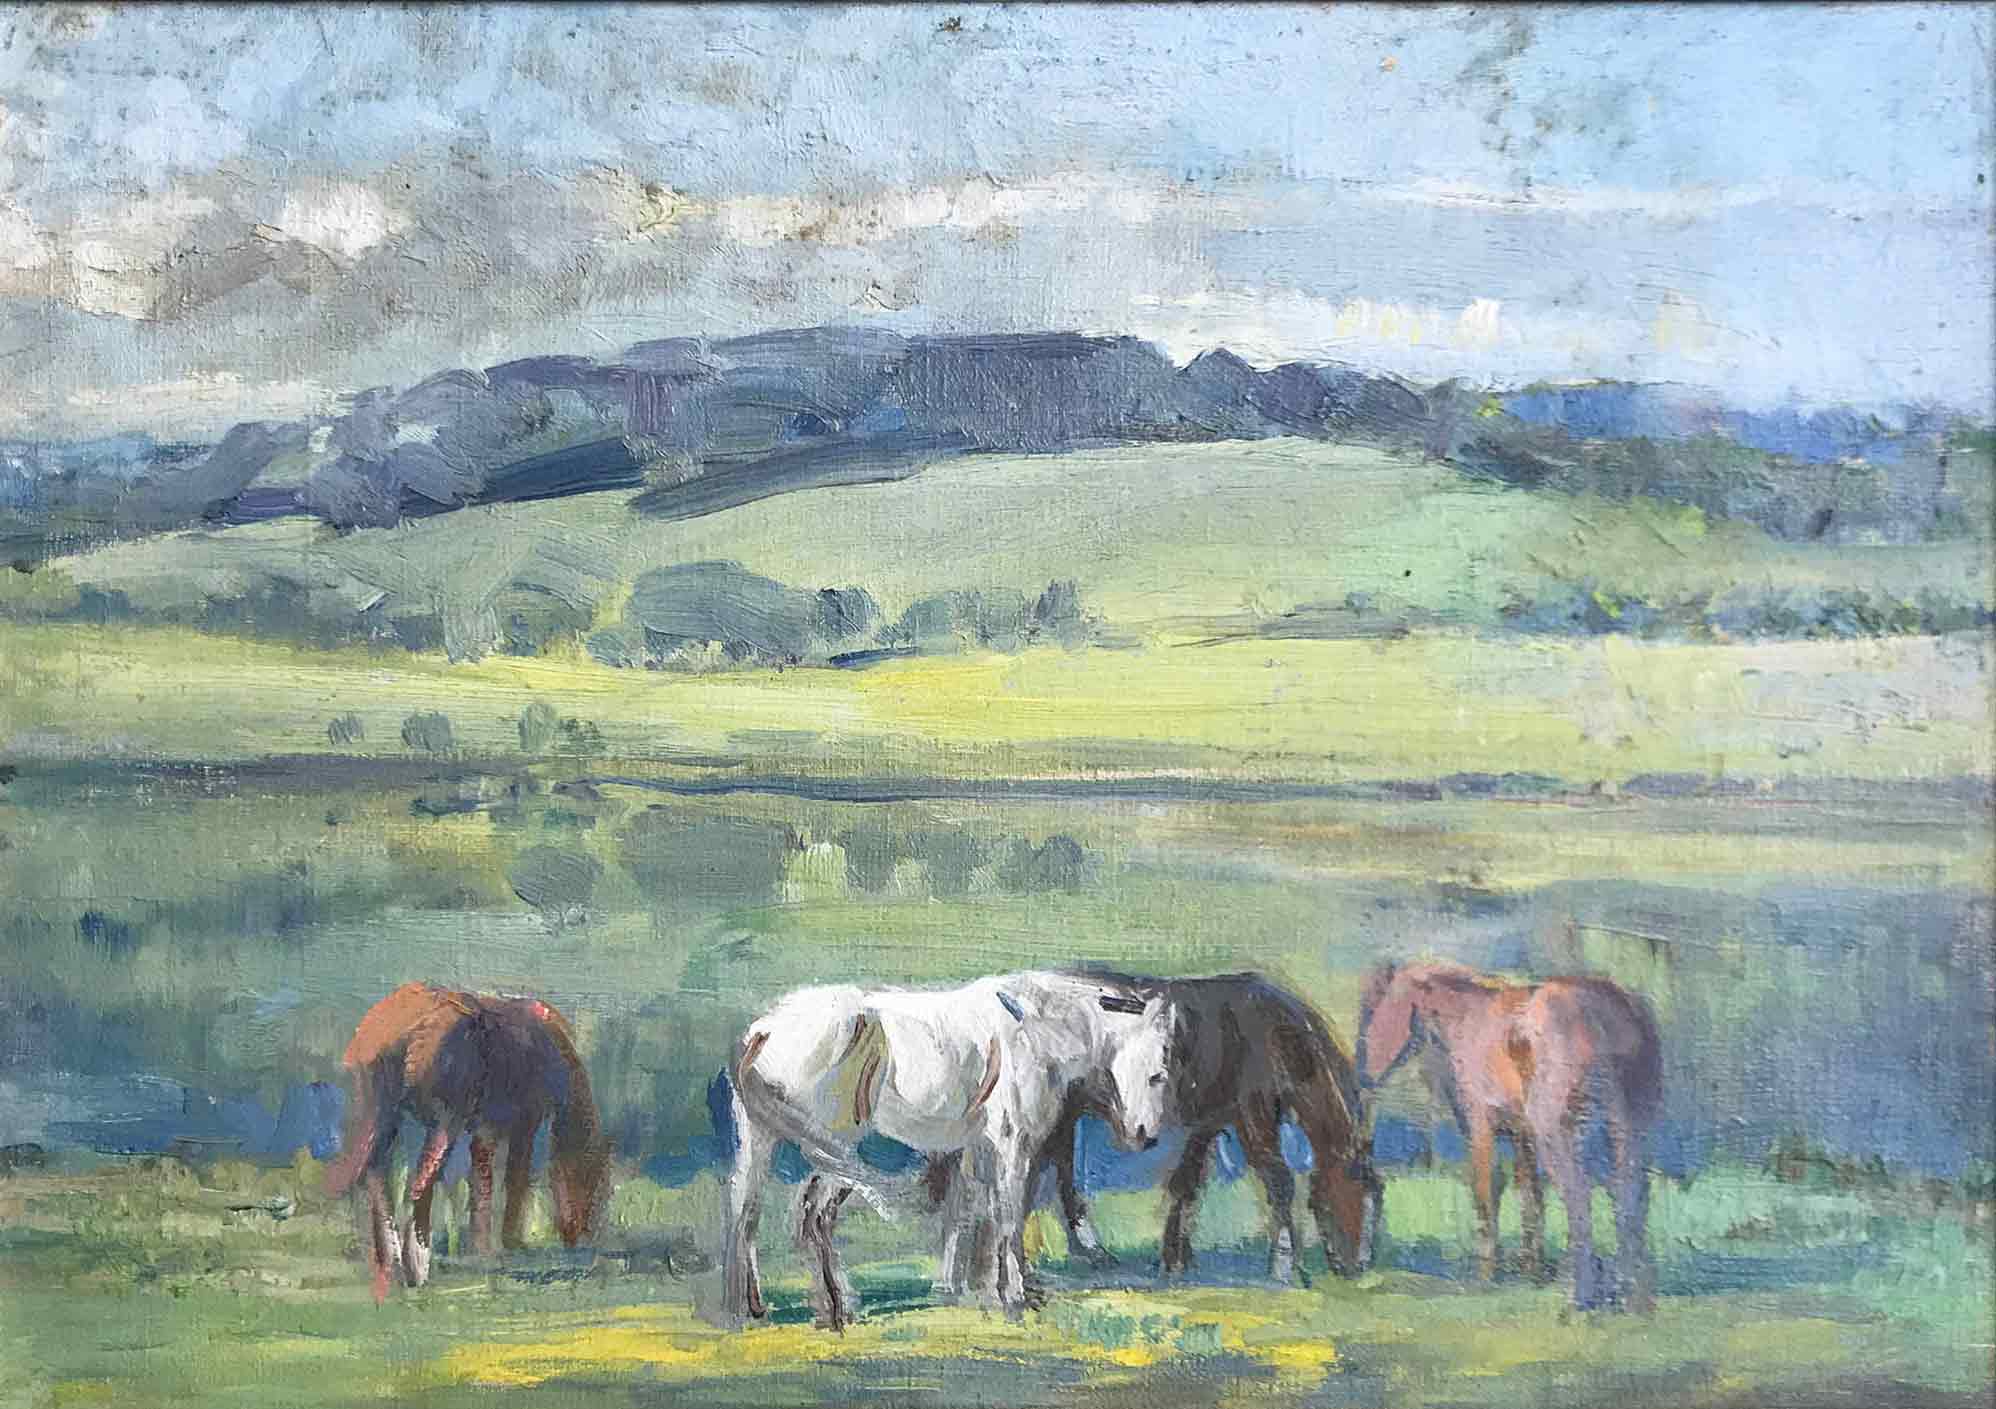 Alice Des Clayes Oil Painting 'Ponies Grazing in a Landscape'